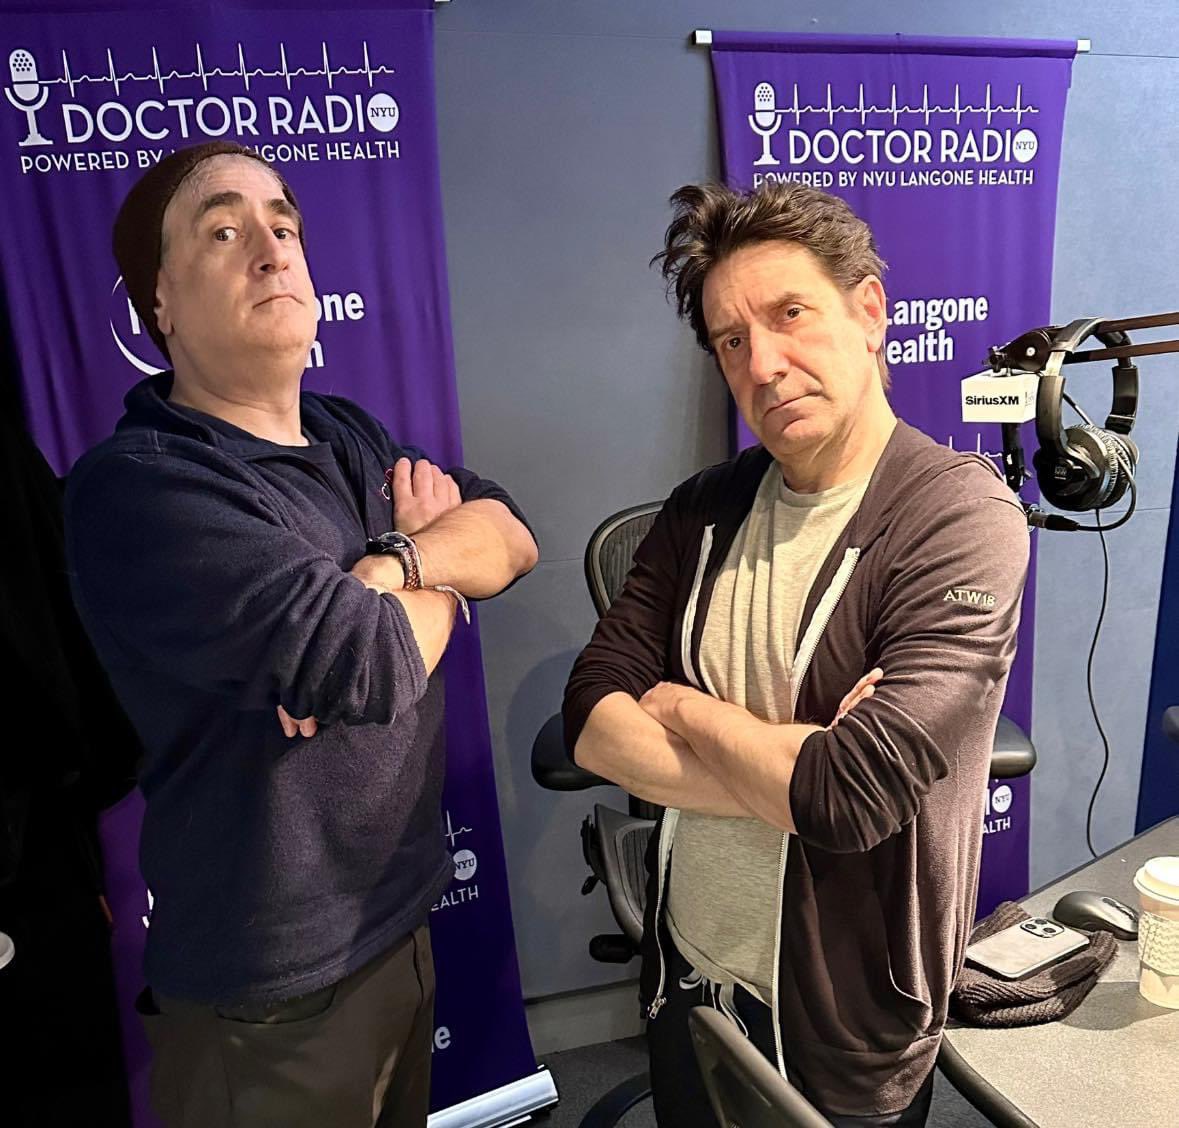 If Doctor Radio’s Emergency Medicine show (Thurs 8-10am ET) posed for an album cover ⬇️ What would the name of @askdrbilly & @heshiegreshie’s hit single be? @SIRIUSXM